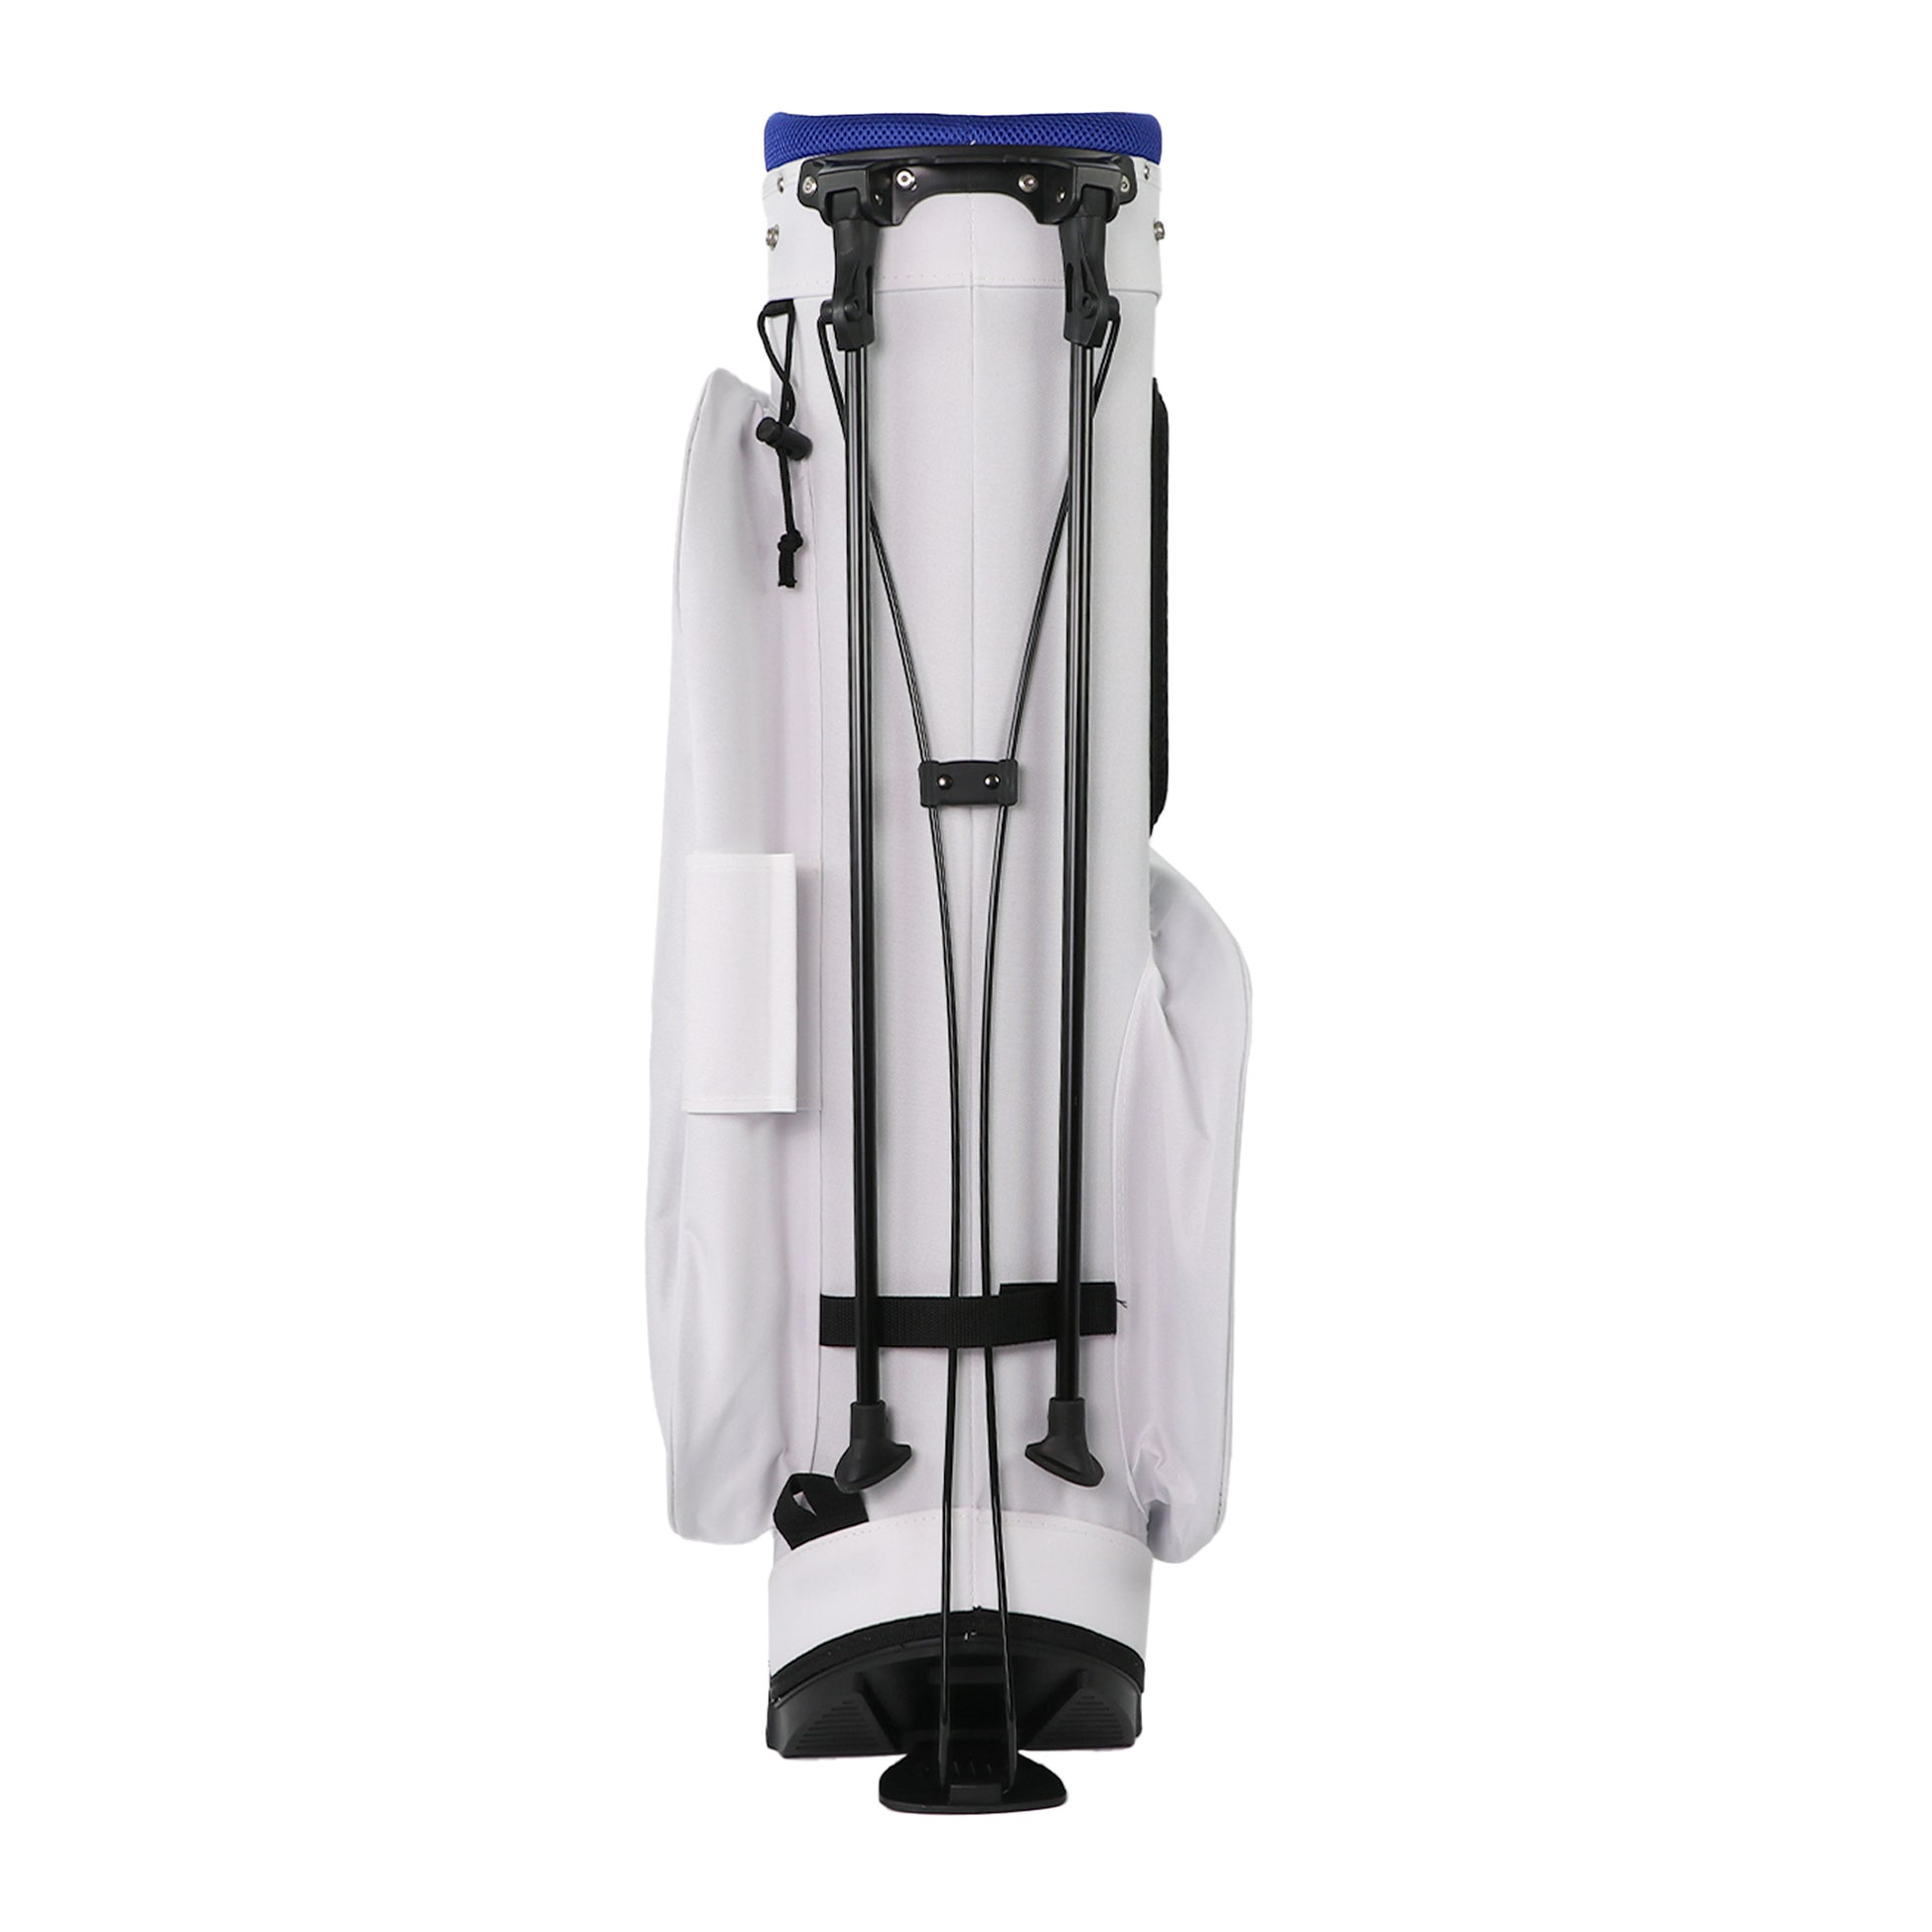 Back view of Michelob ULTRA golf bag standing upright